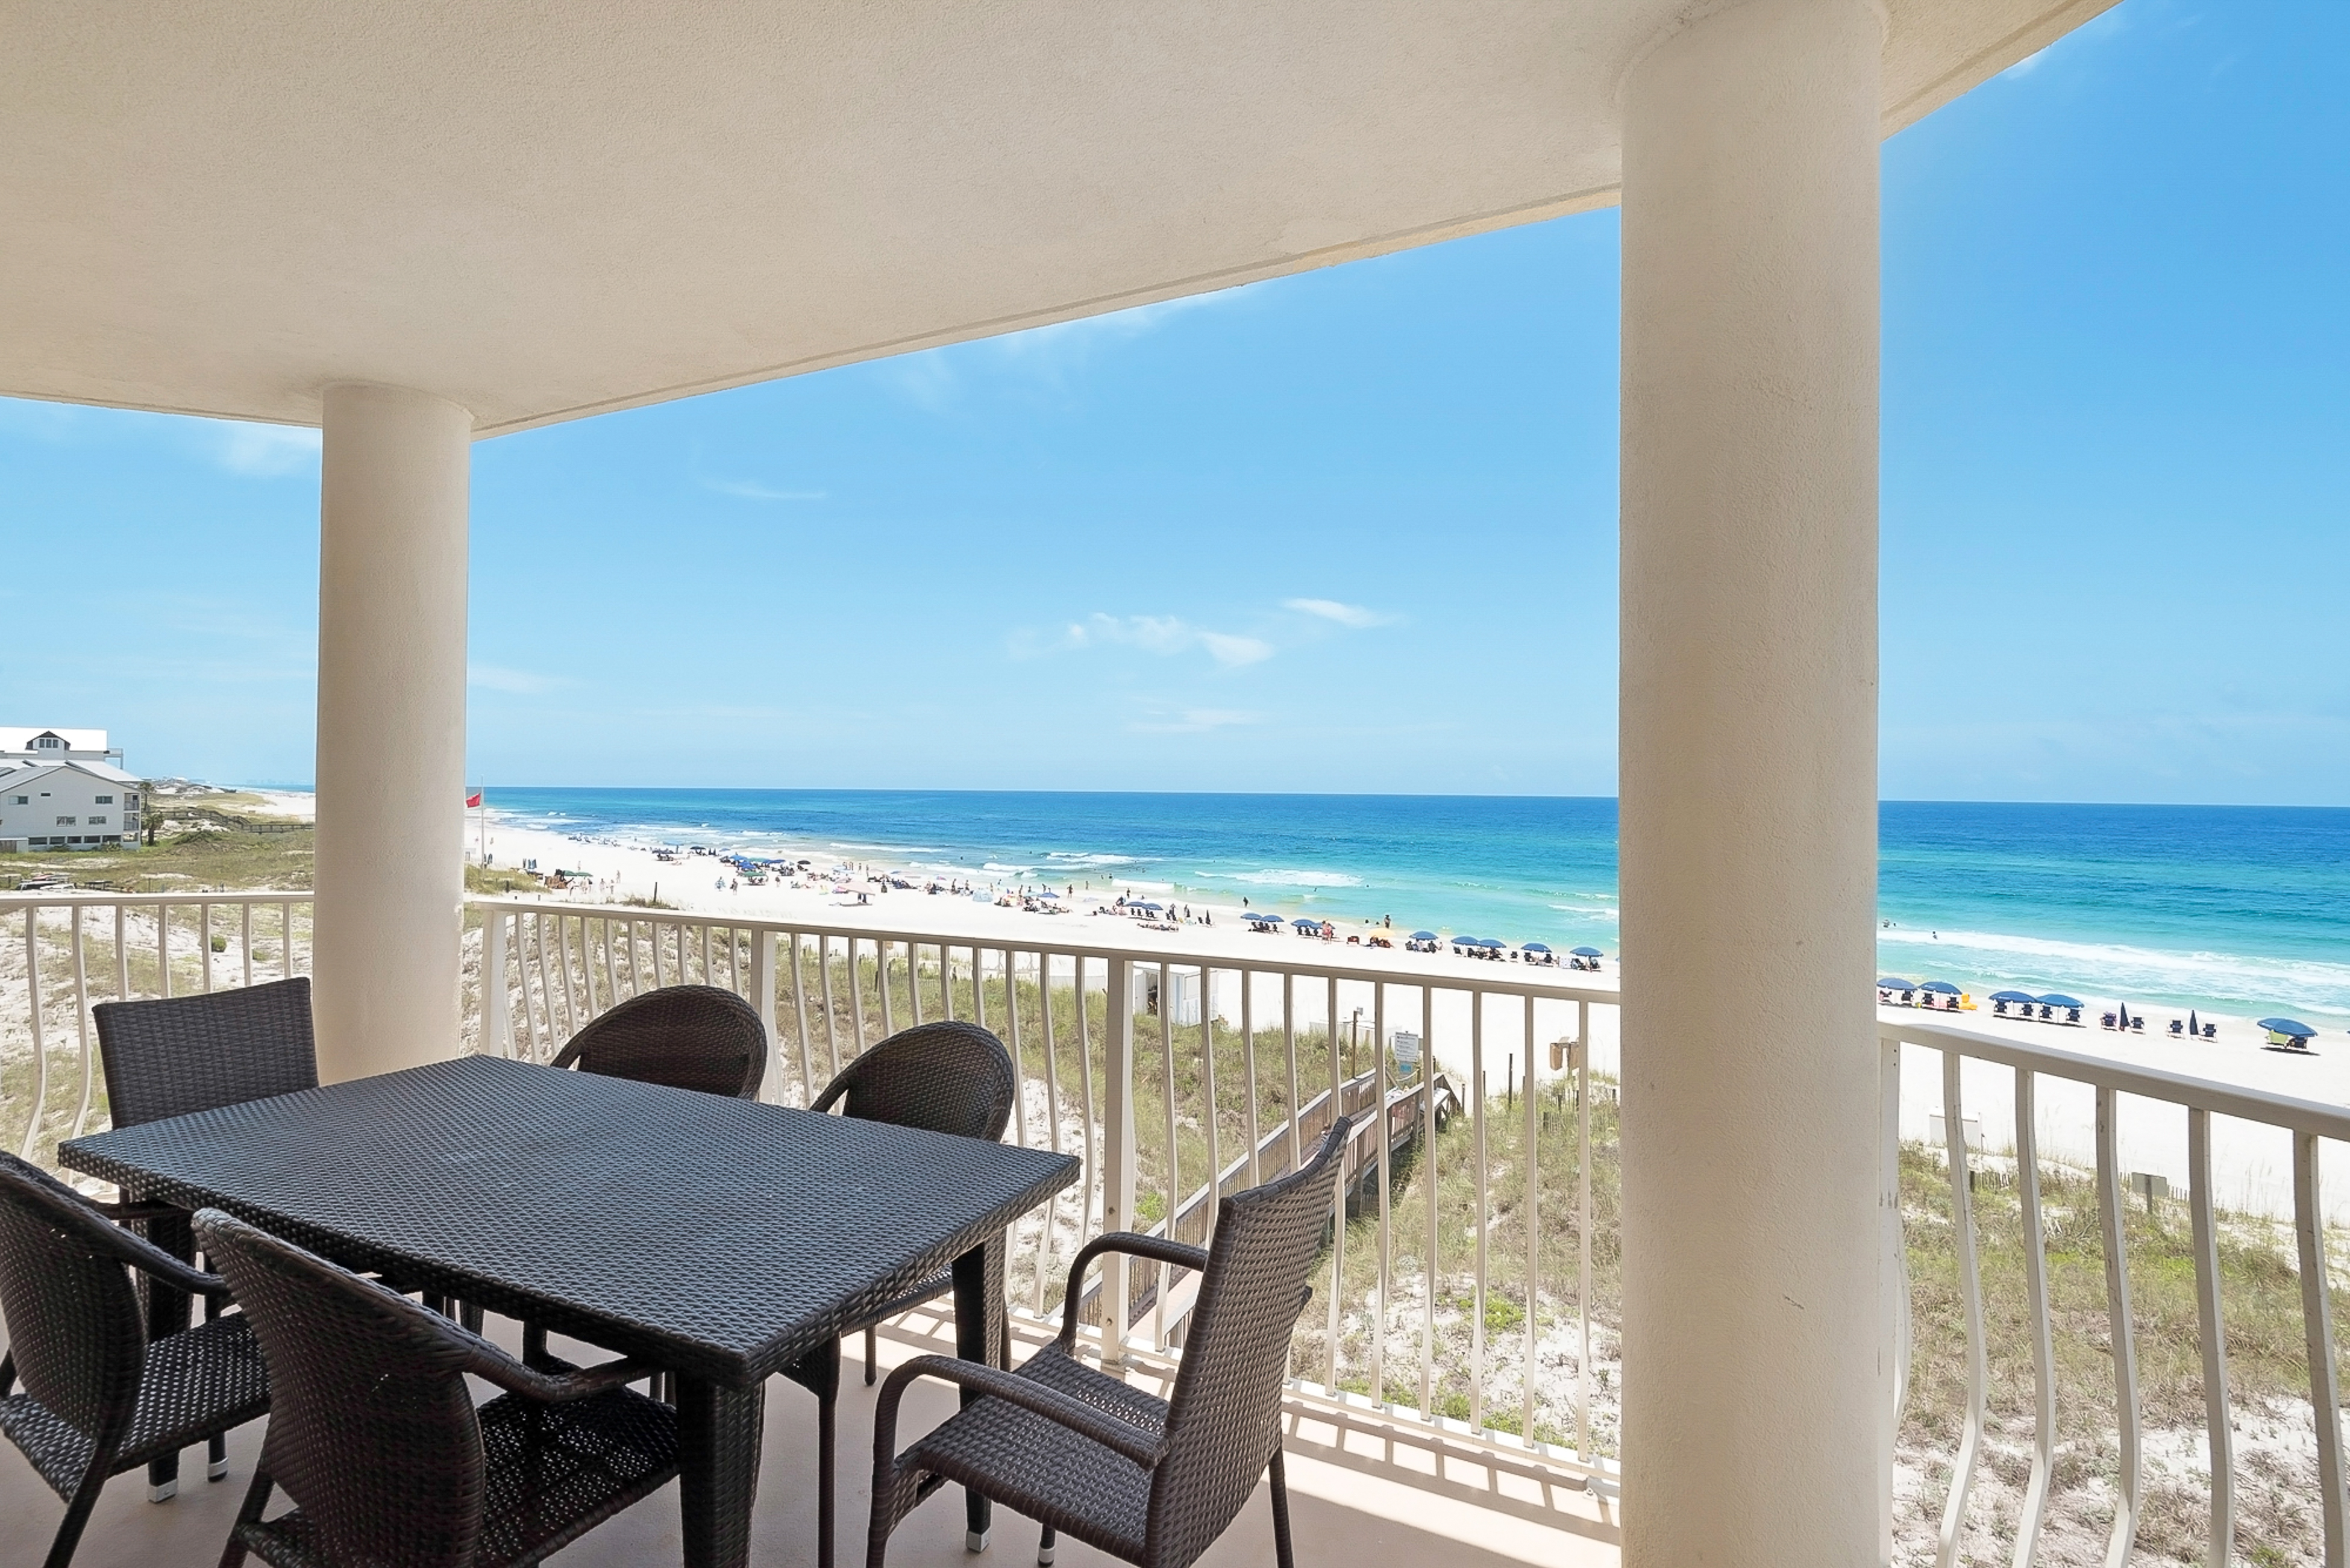 Dunes of Seagrove B305 Condo rental in Dunes of Seagrove in Highway 30-A Florida - #25